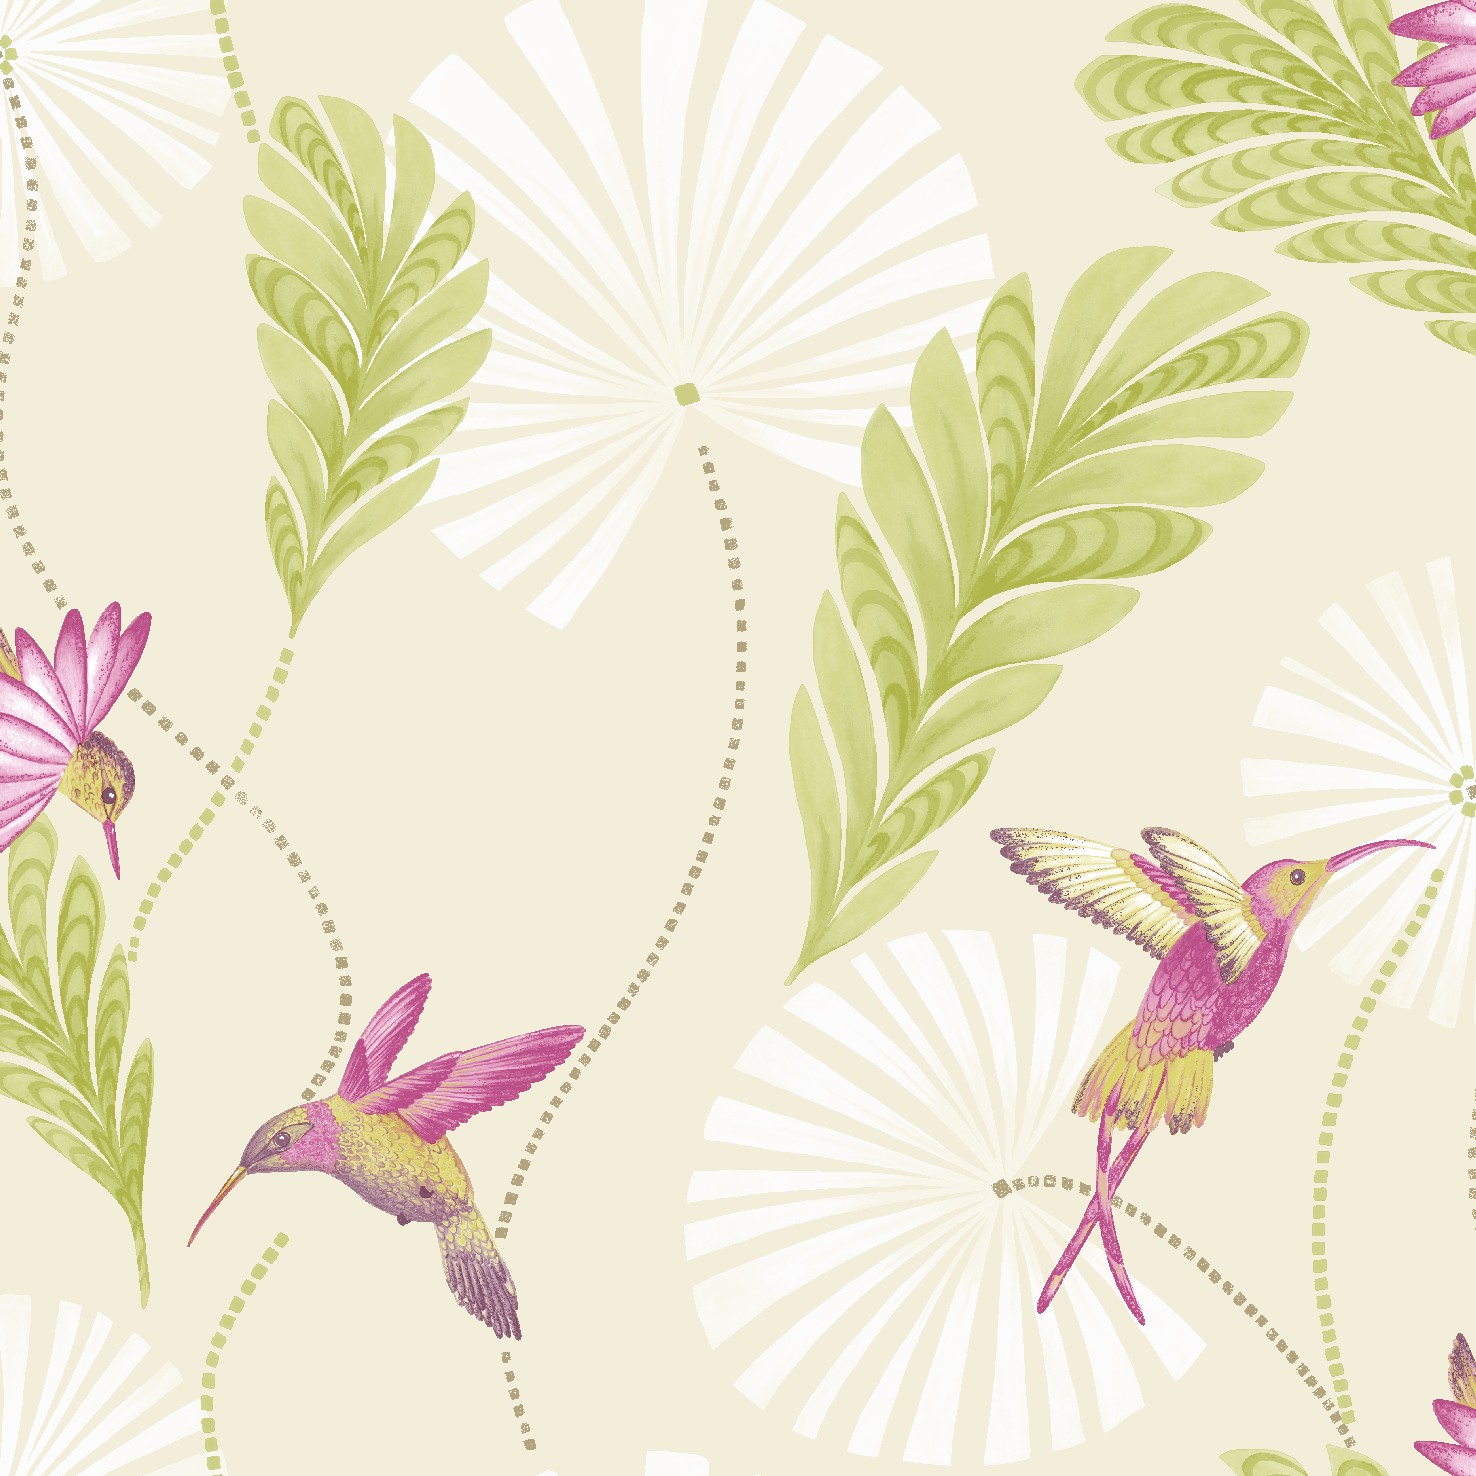  bird wallpaper designs displaying 14 images for bird wallpaper designs